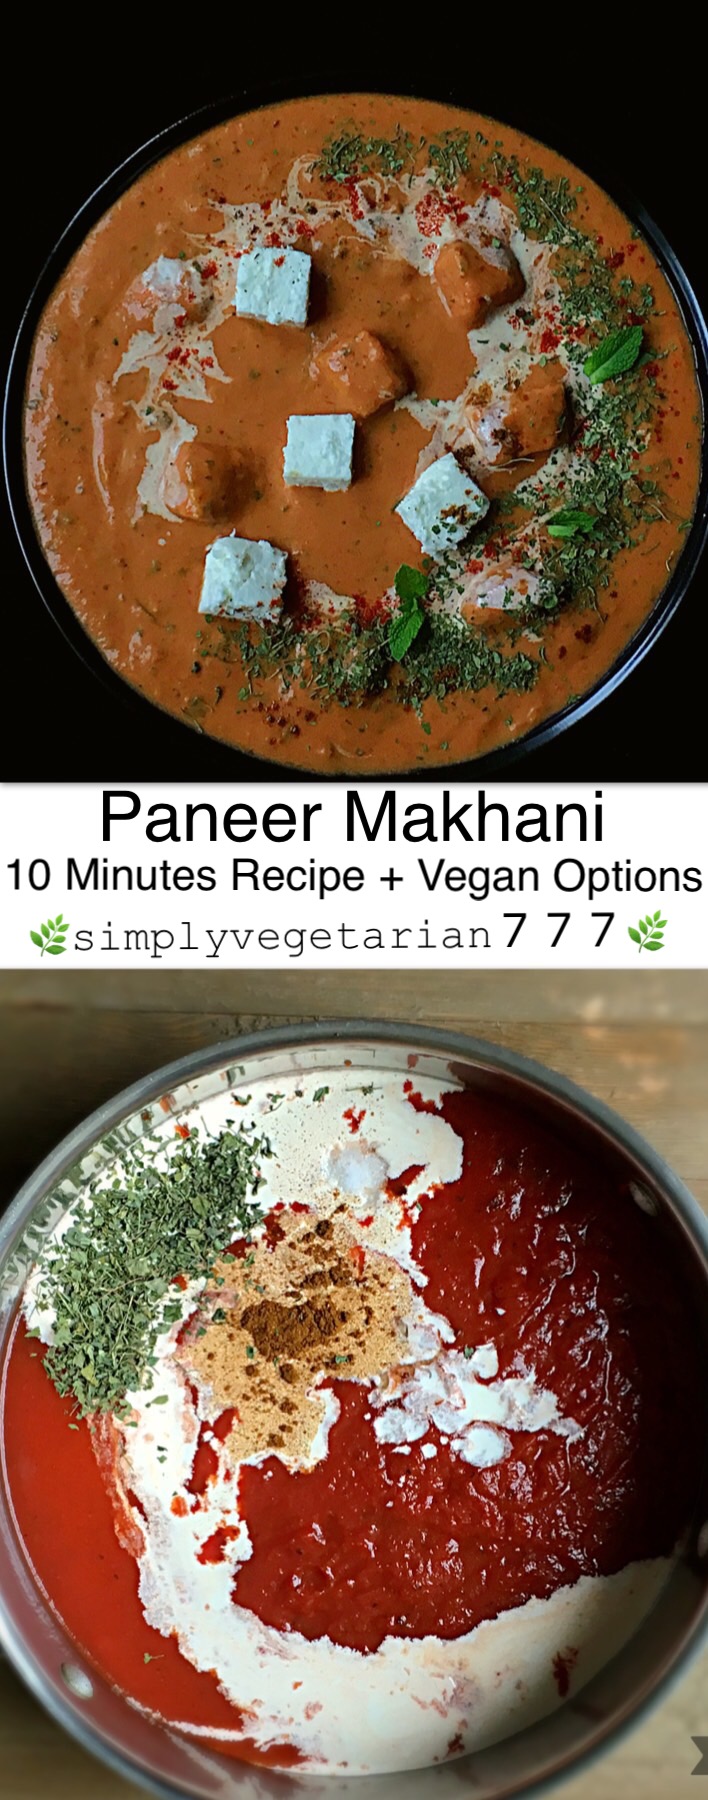 This 10 Minutes Quick Easy Paneer Makhani Recipe is a must try for all the Paneer lovers. It is QUICK + EASY + EFFICIENT + DELICIOUS. This curry tastes best with soft Naan or Tandoori Roti. It is perfect to try on any busy weekday or a lazy weekend. #paneer #paneerrecipes #paneermakhani #tofumakhani #mughlai #quickcurry #easycurry